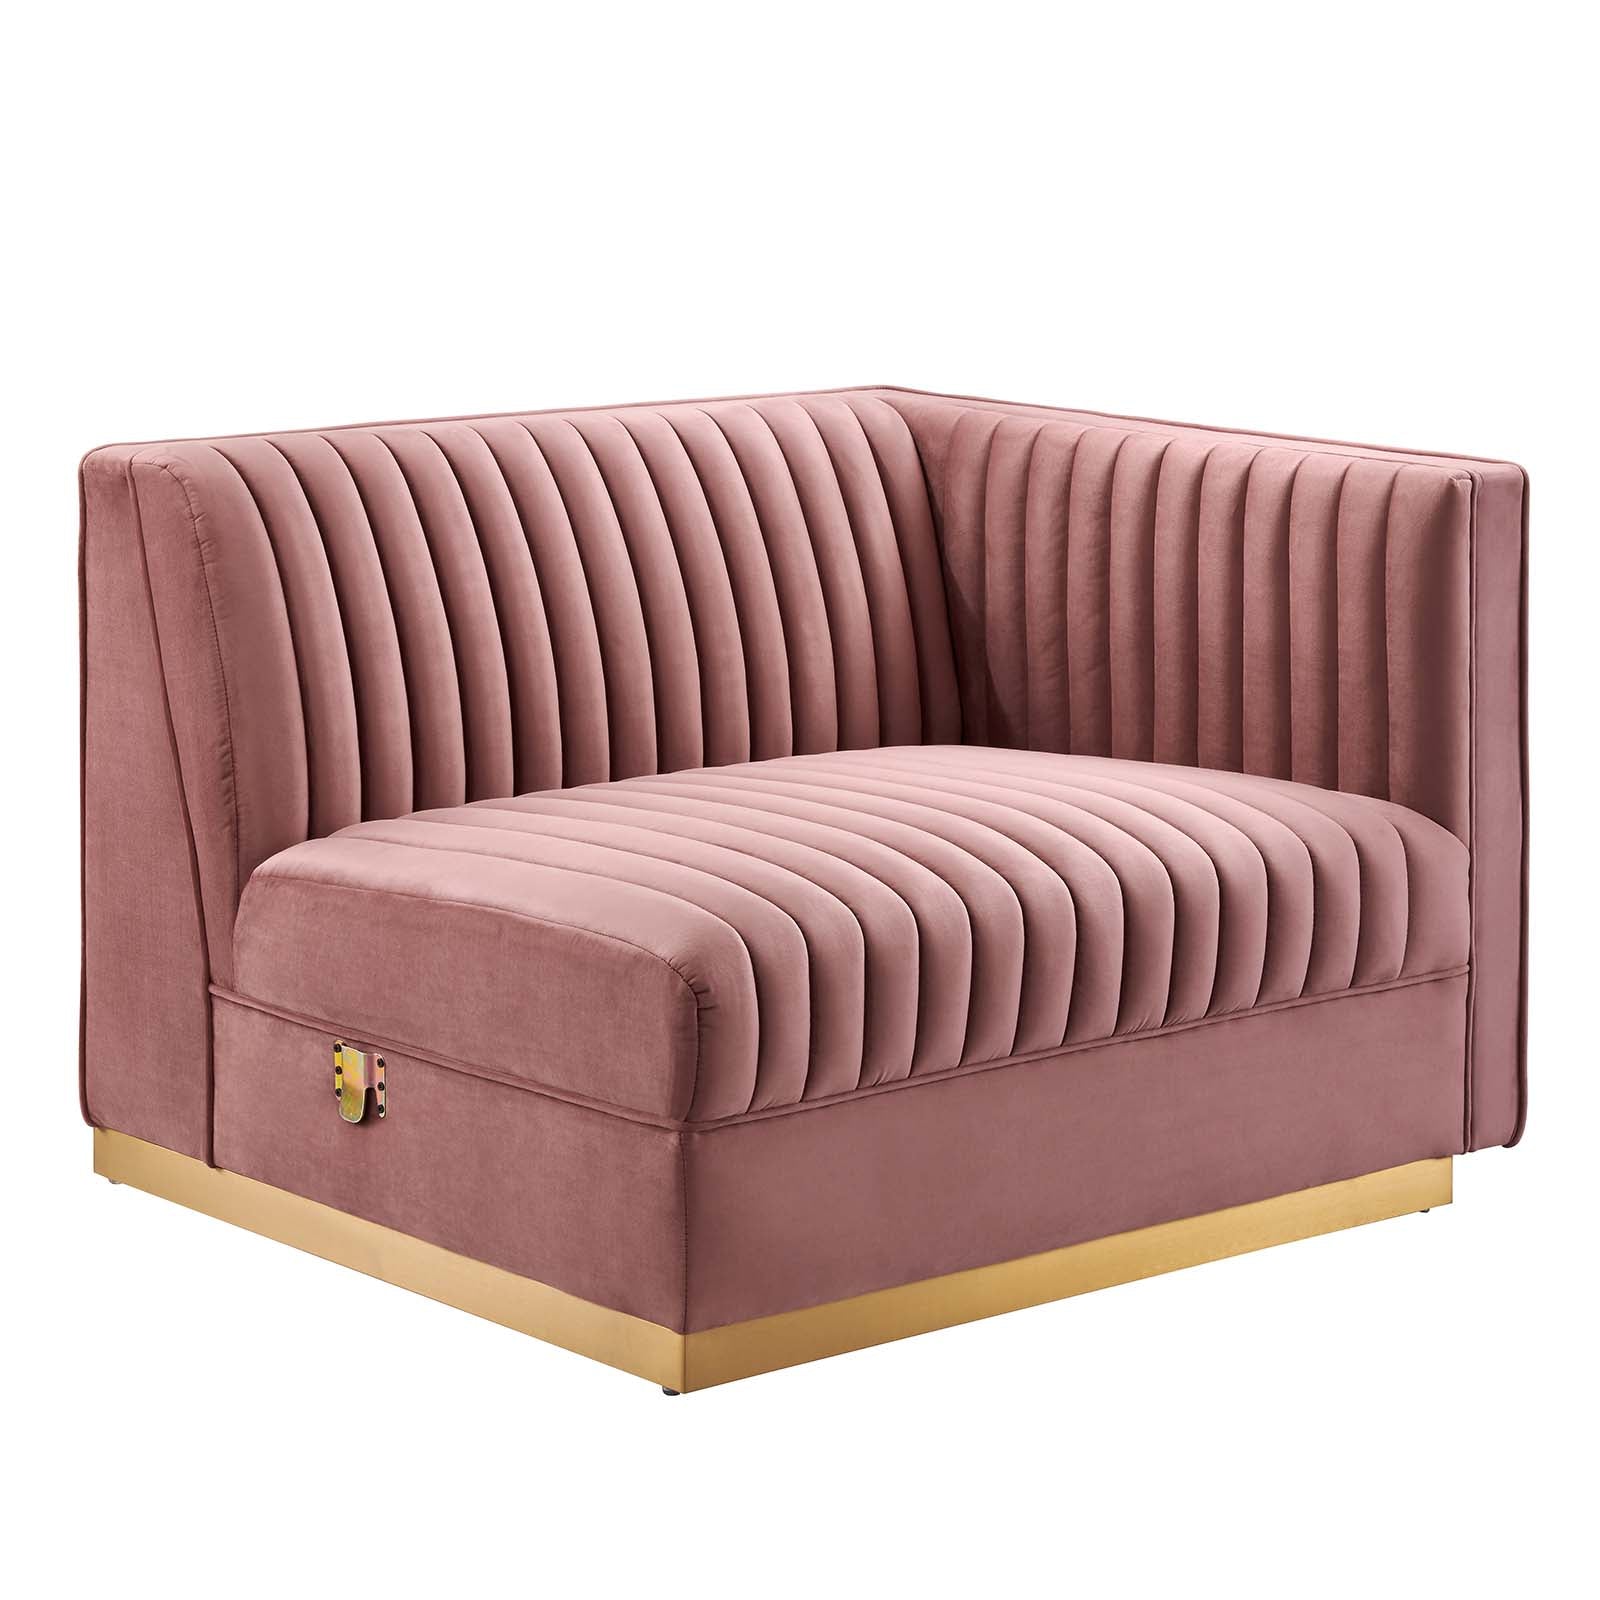 Modway Sectional Sofas - Sanguine Channel Tufted Performance Velvet 7-Piece Right-Facing Modular Sectional Sofa Dusty Rose